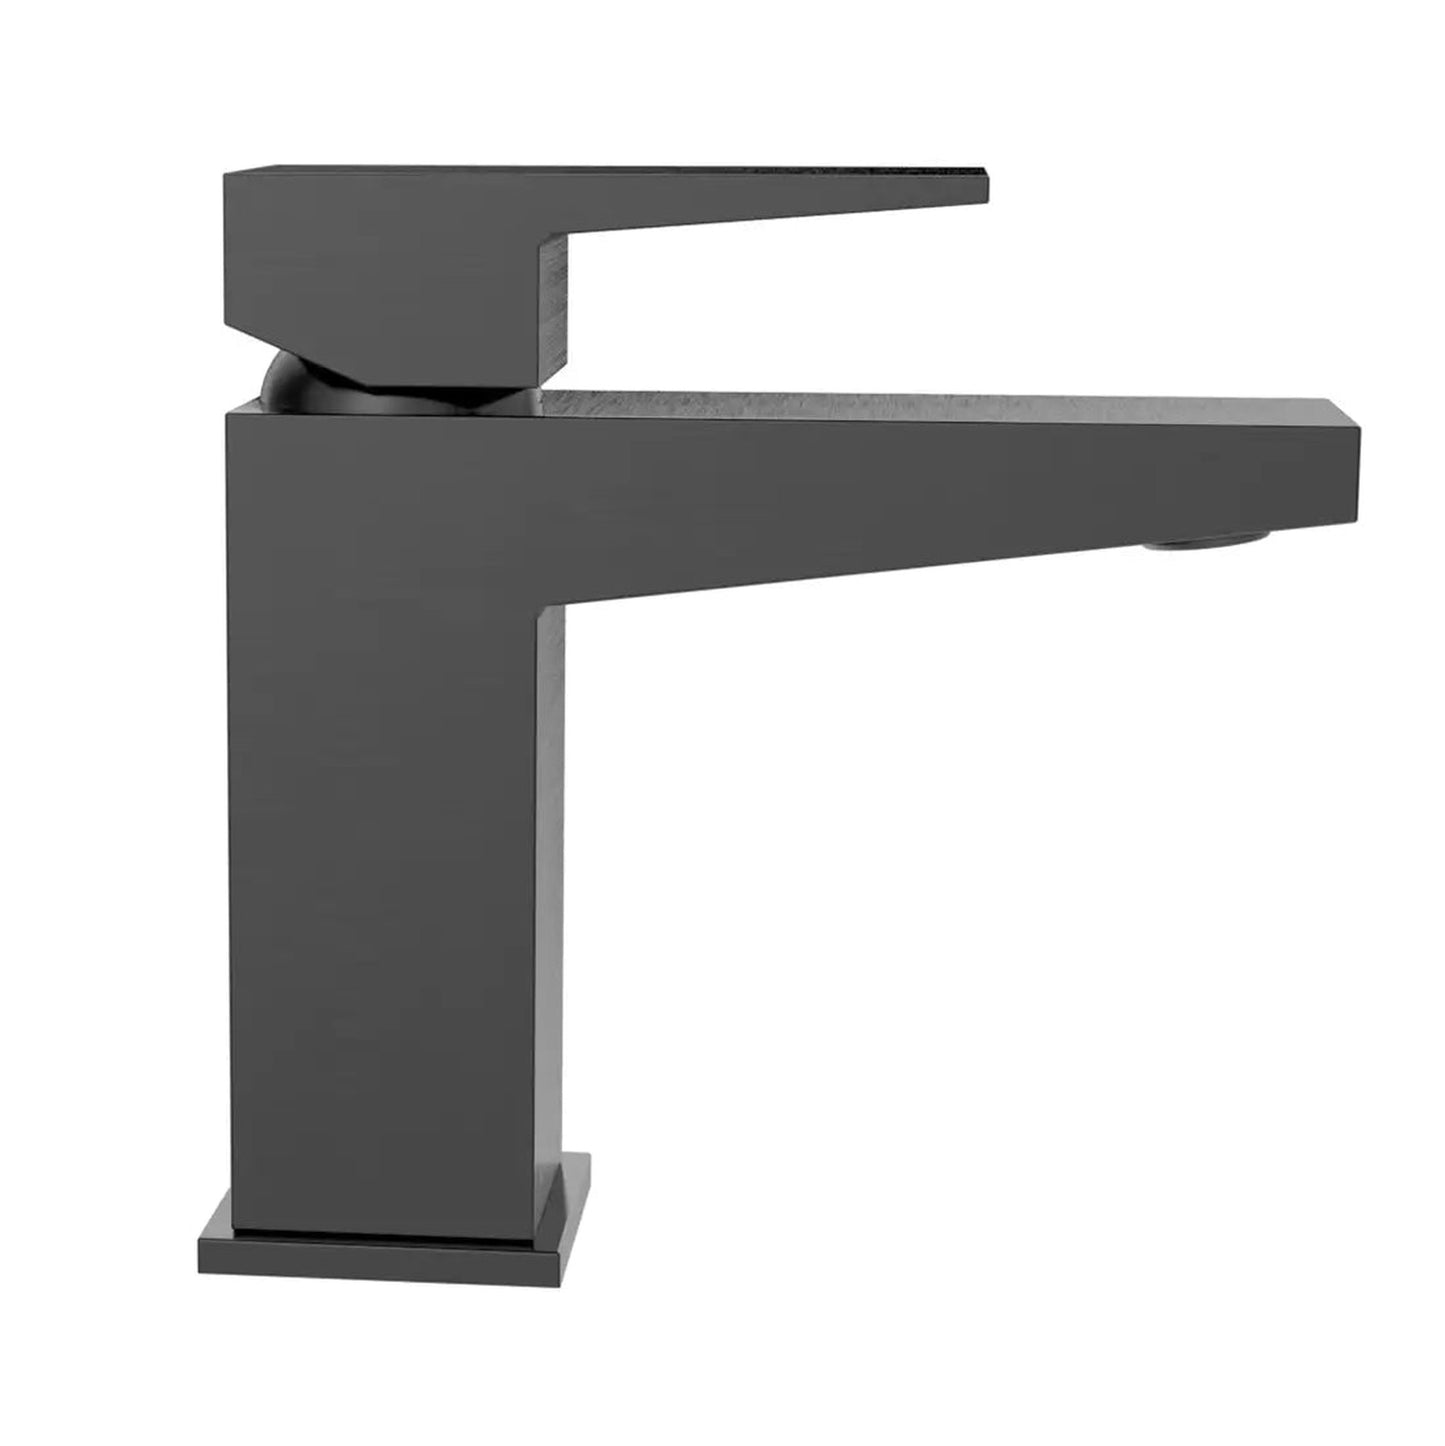 Lulani Boracay Gun Metal 1.2 GPM Single Hole Brass Faucet With Drain Assembly